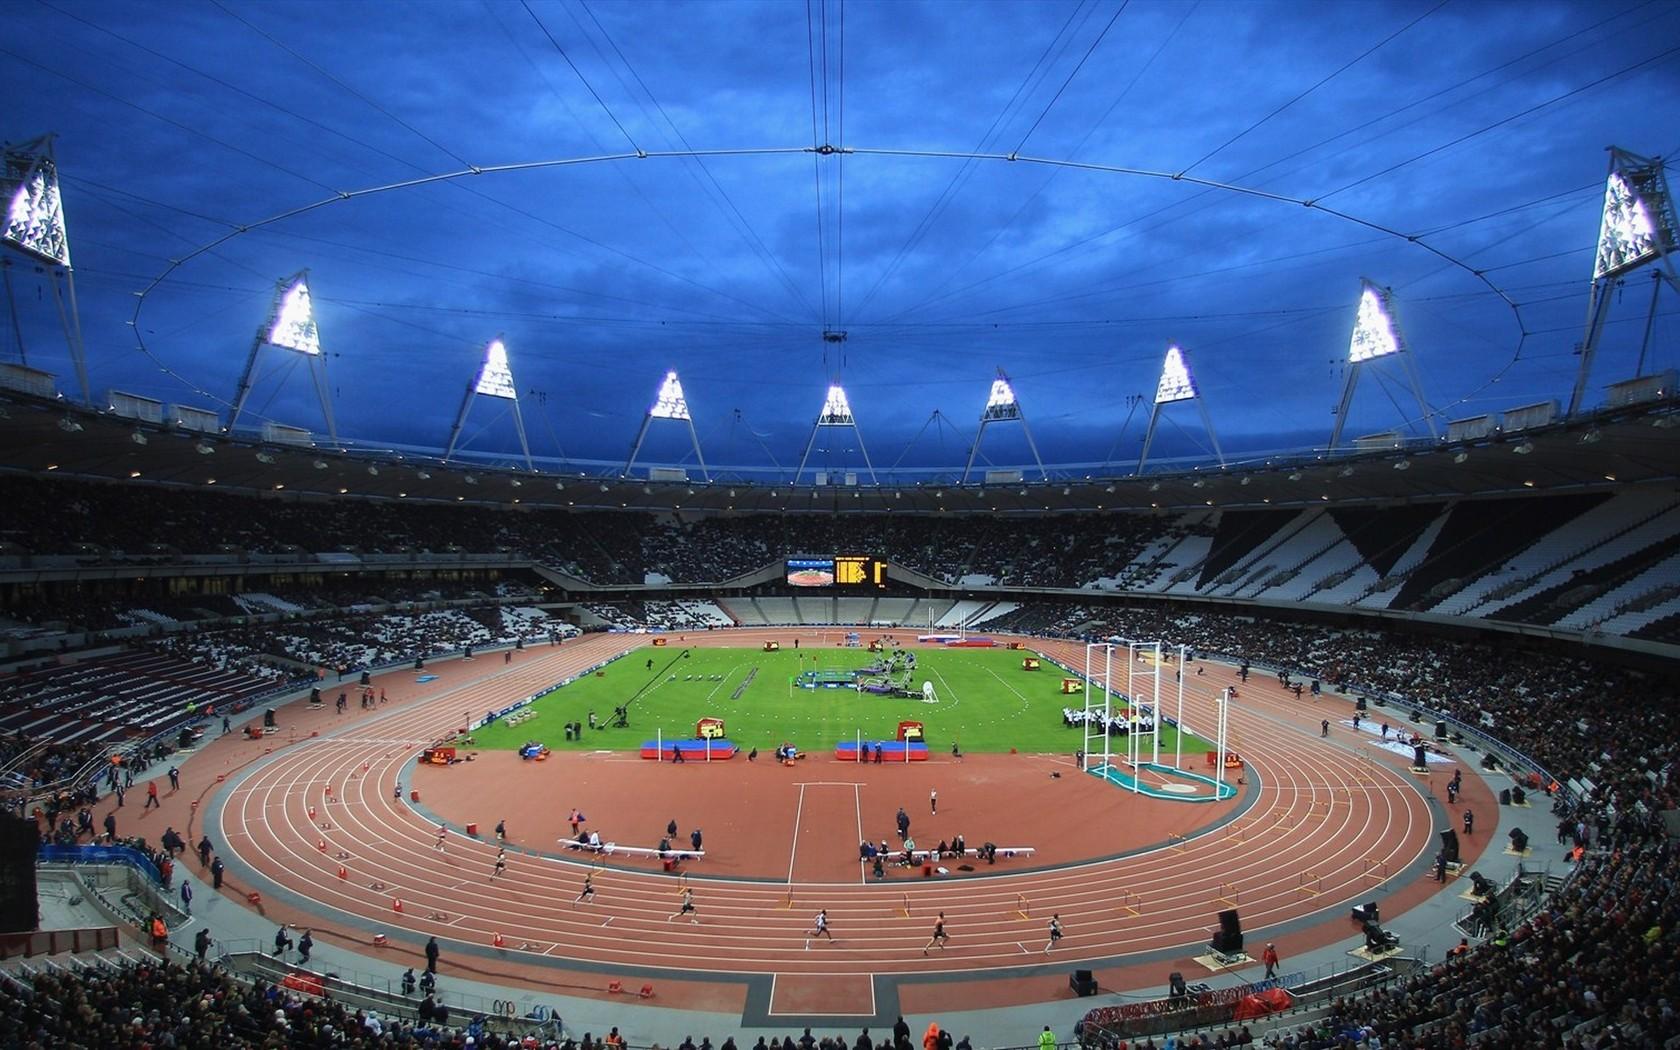 Download Wallpaper Stadium Track And Field Audience London Free ...